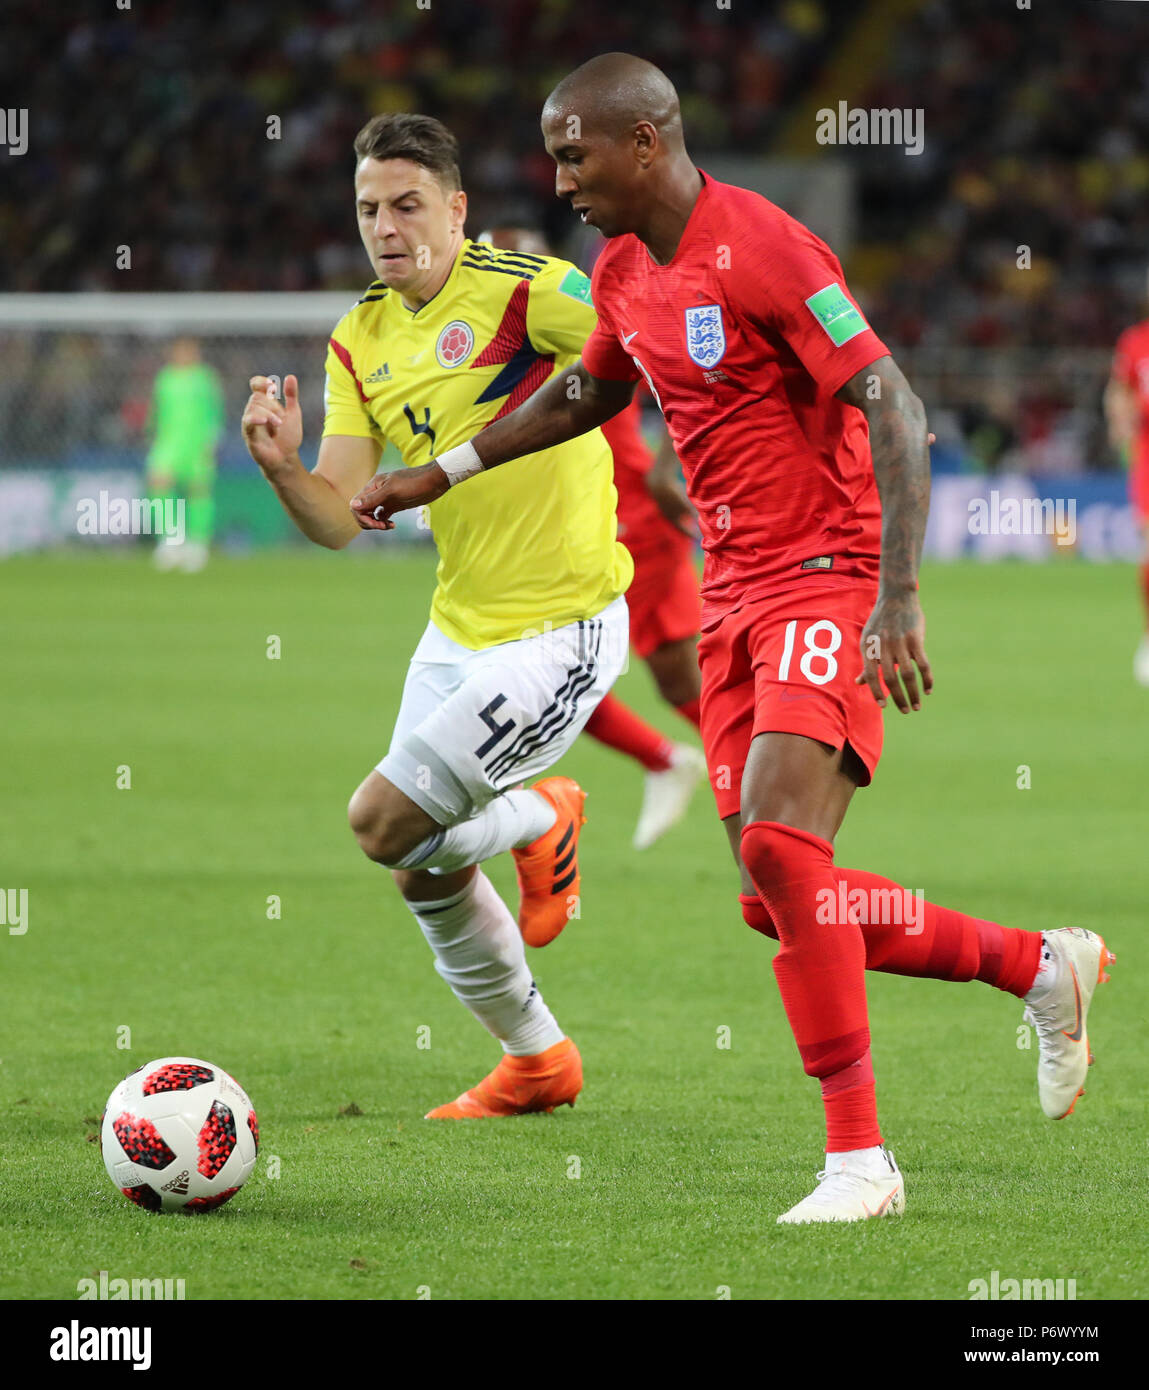 Moscow, Russia. 3rd July, 2018. Ashley Young (R) of England vies with Santiago Arias of Colombia during the 2018 FIFA World Cup round of 16 match between England and Colombia in Moscow, Russia, July 3, 2018. Credit: Bai Xueqi/Xinhua/Alamy Live News Stock Photo